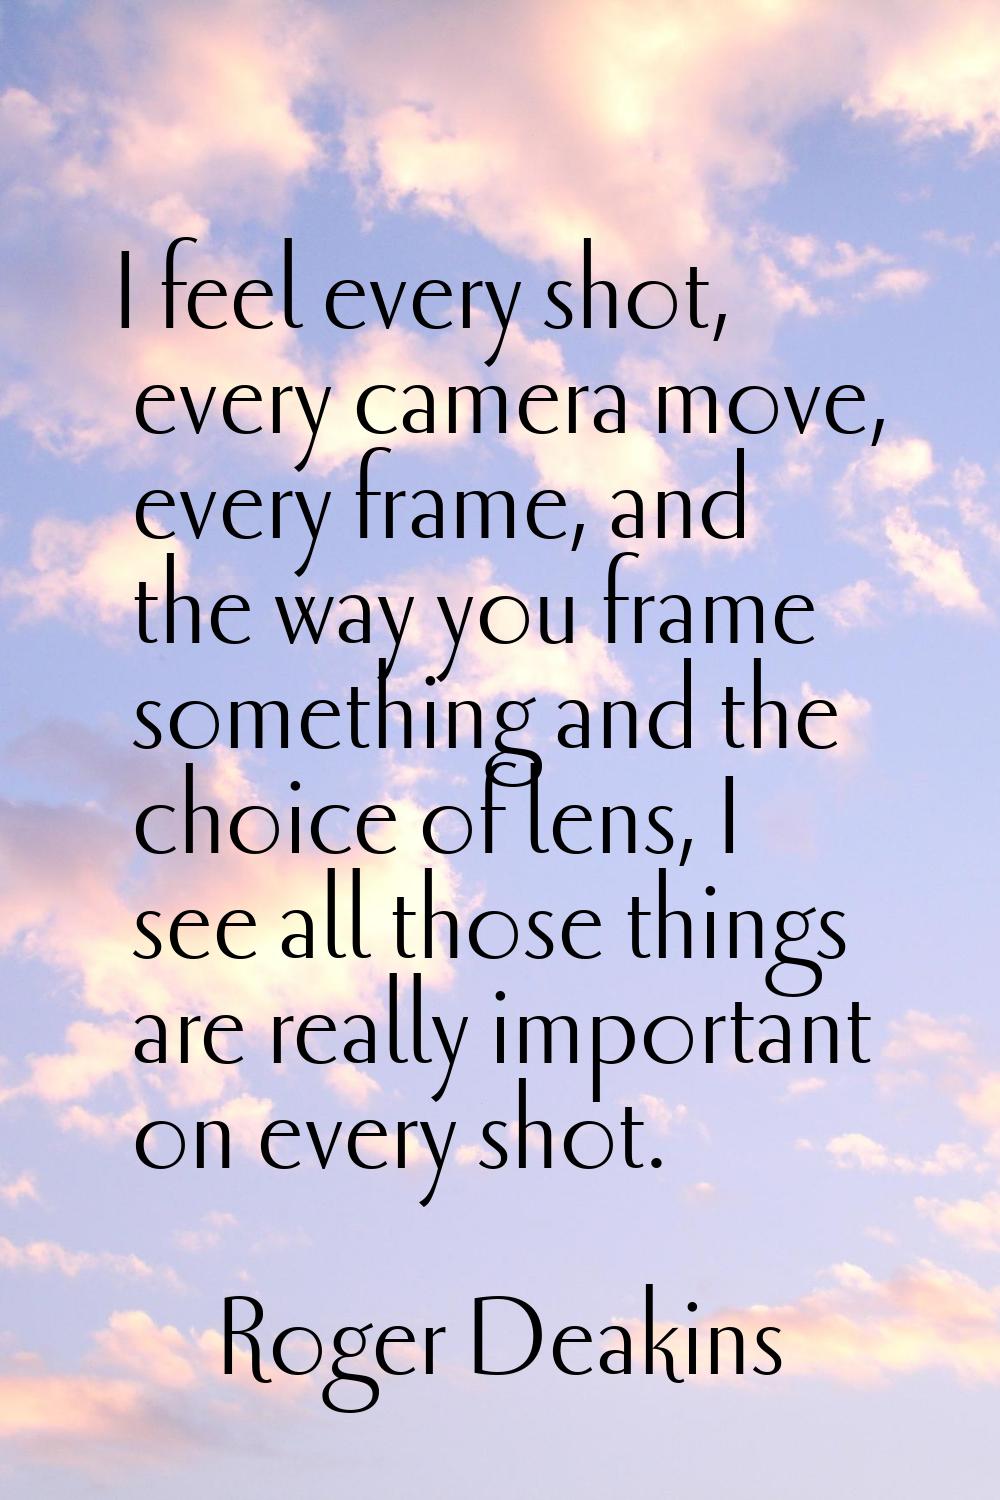 I feel every shot, every camera move, every frame, and the way you frame something and the choice o